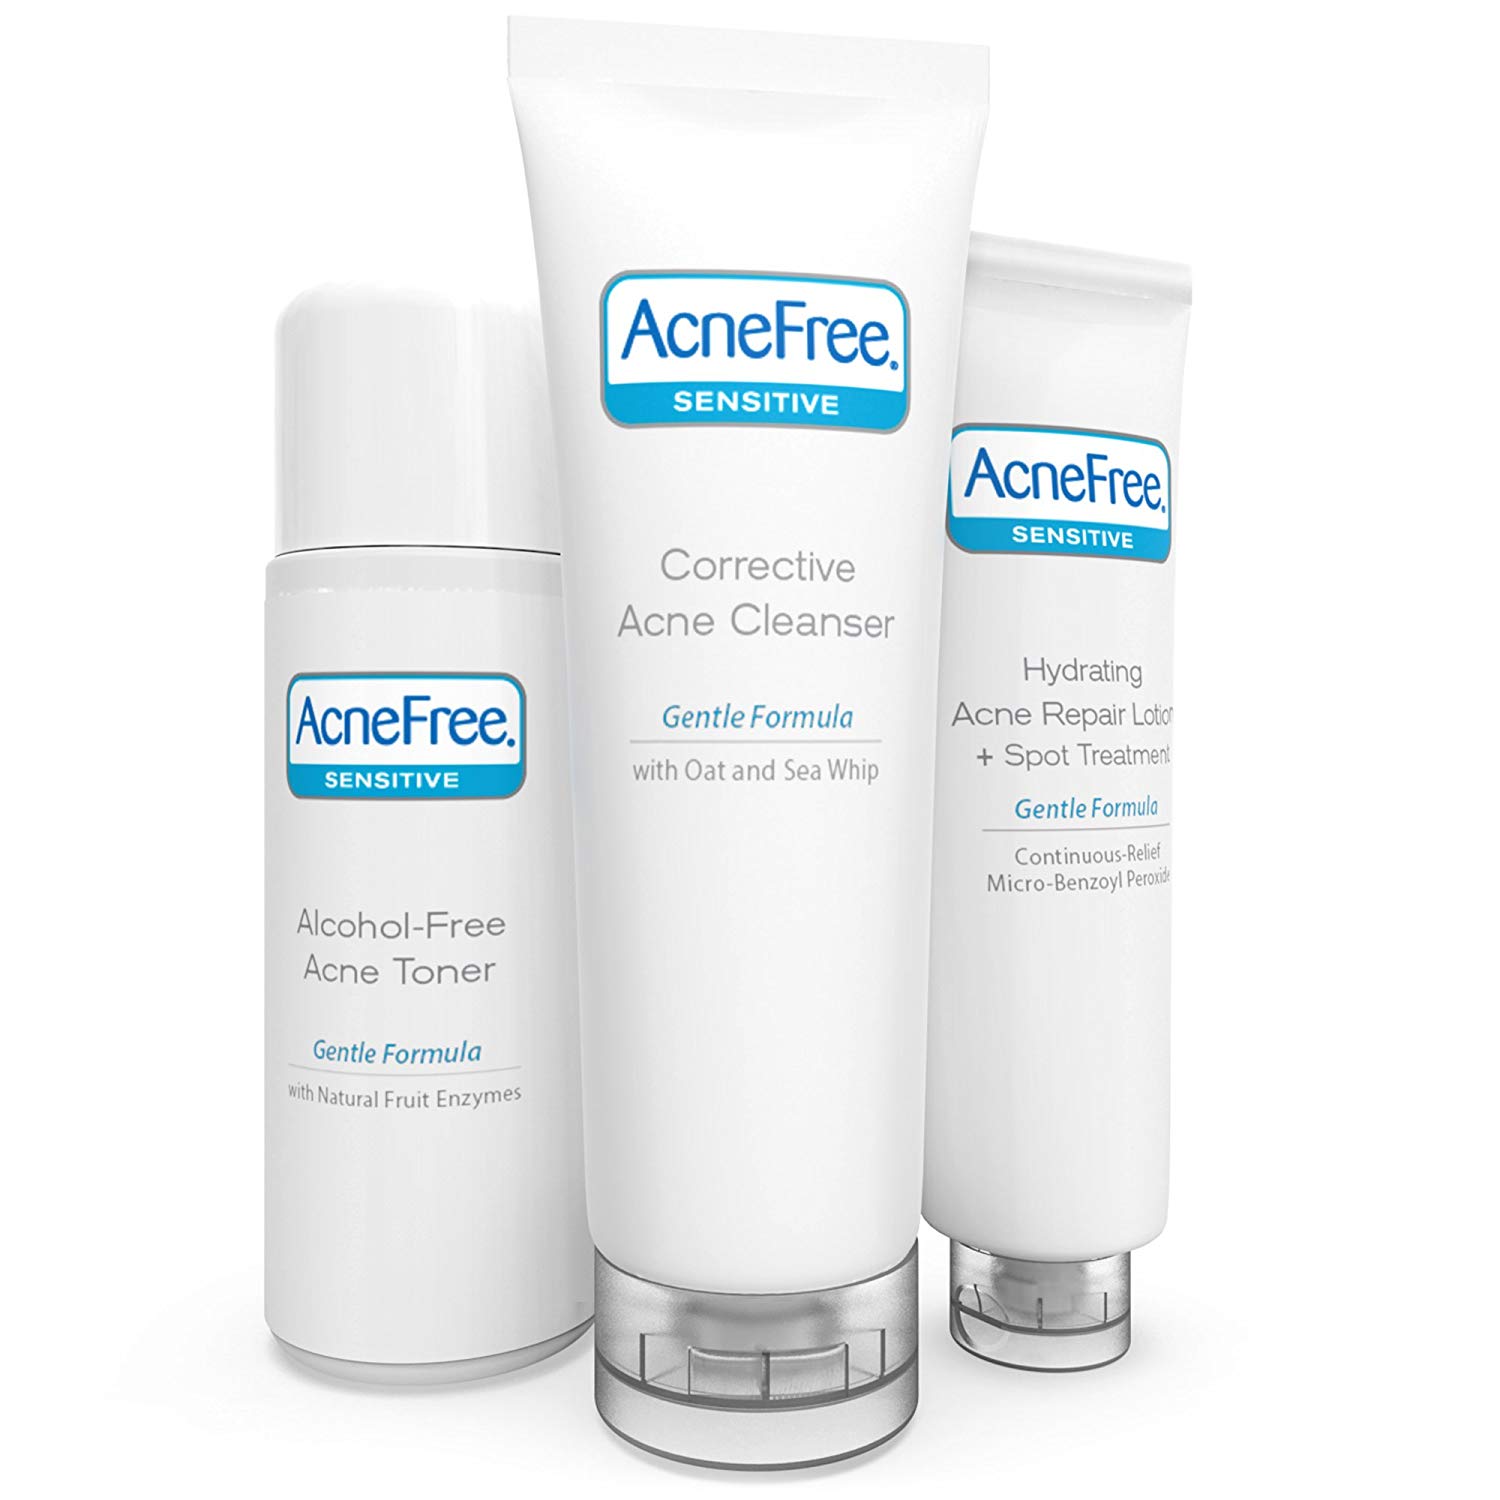 Acne Free Sensitive Skin System Review